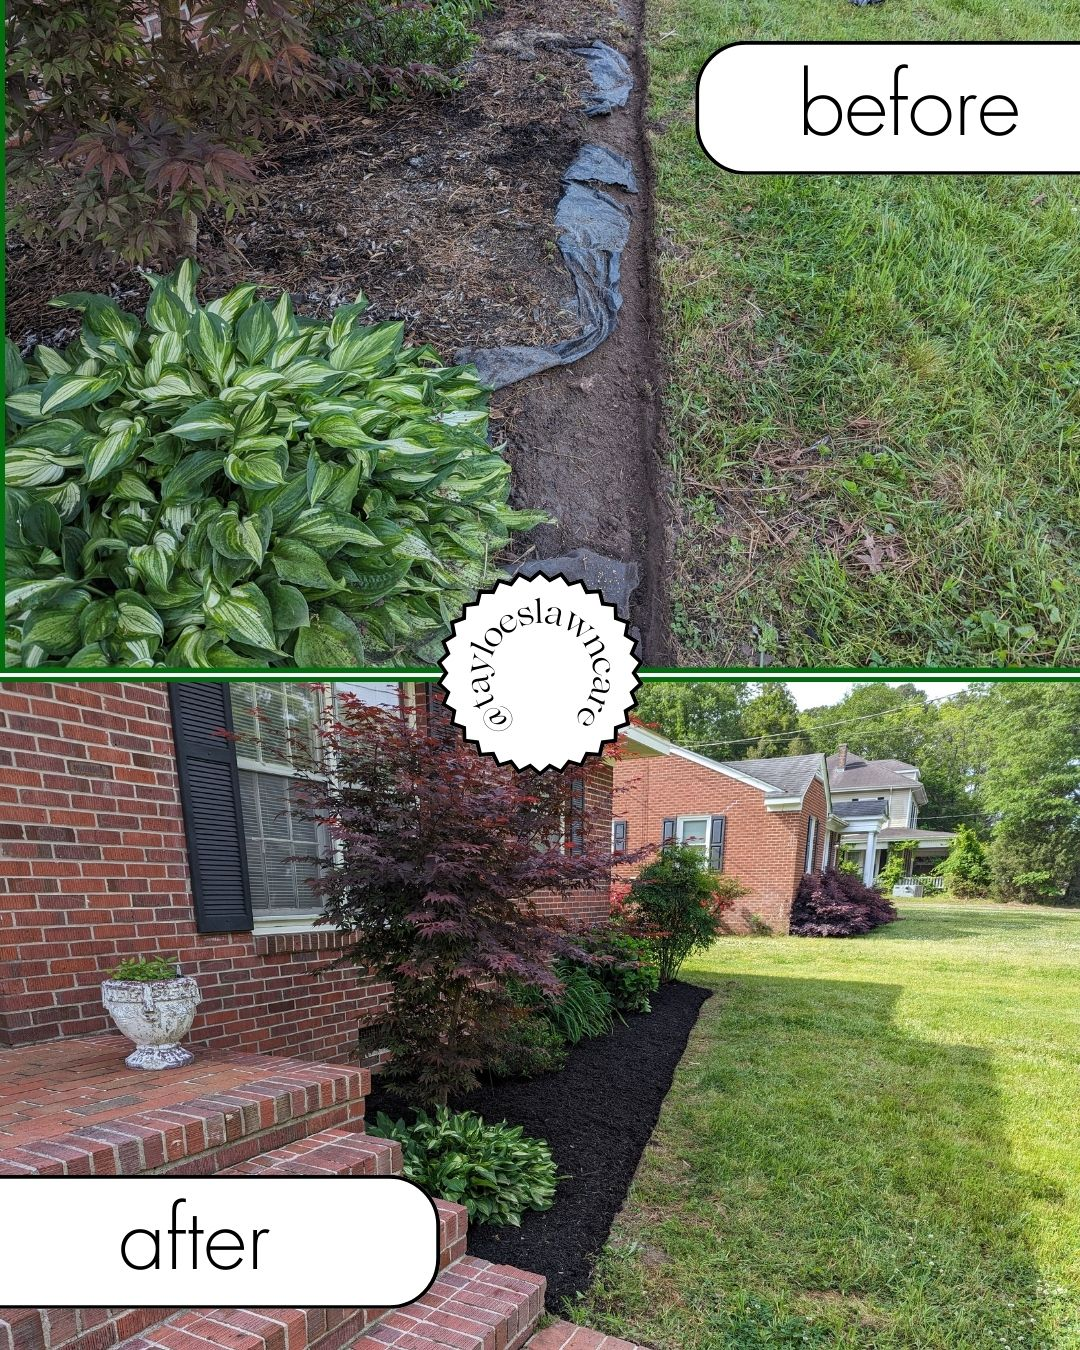 Residential landscaping upgrade